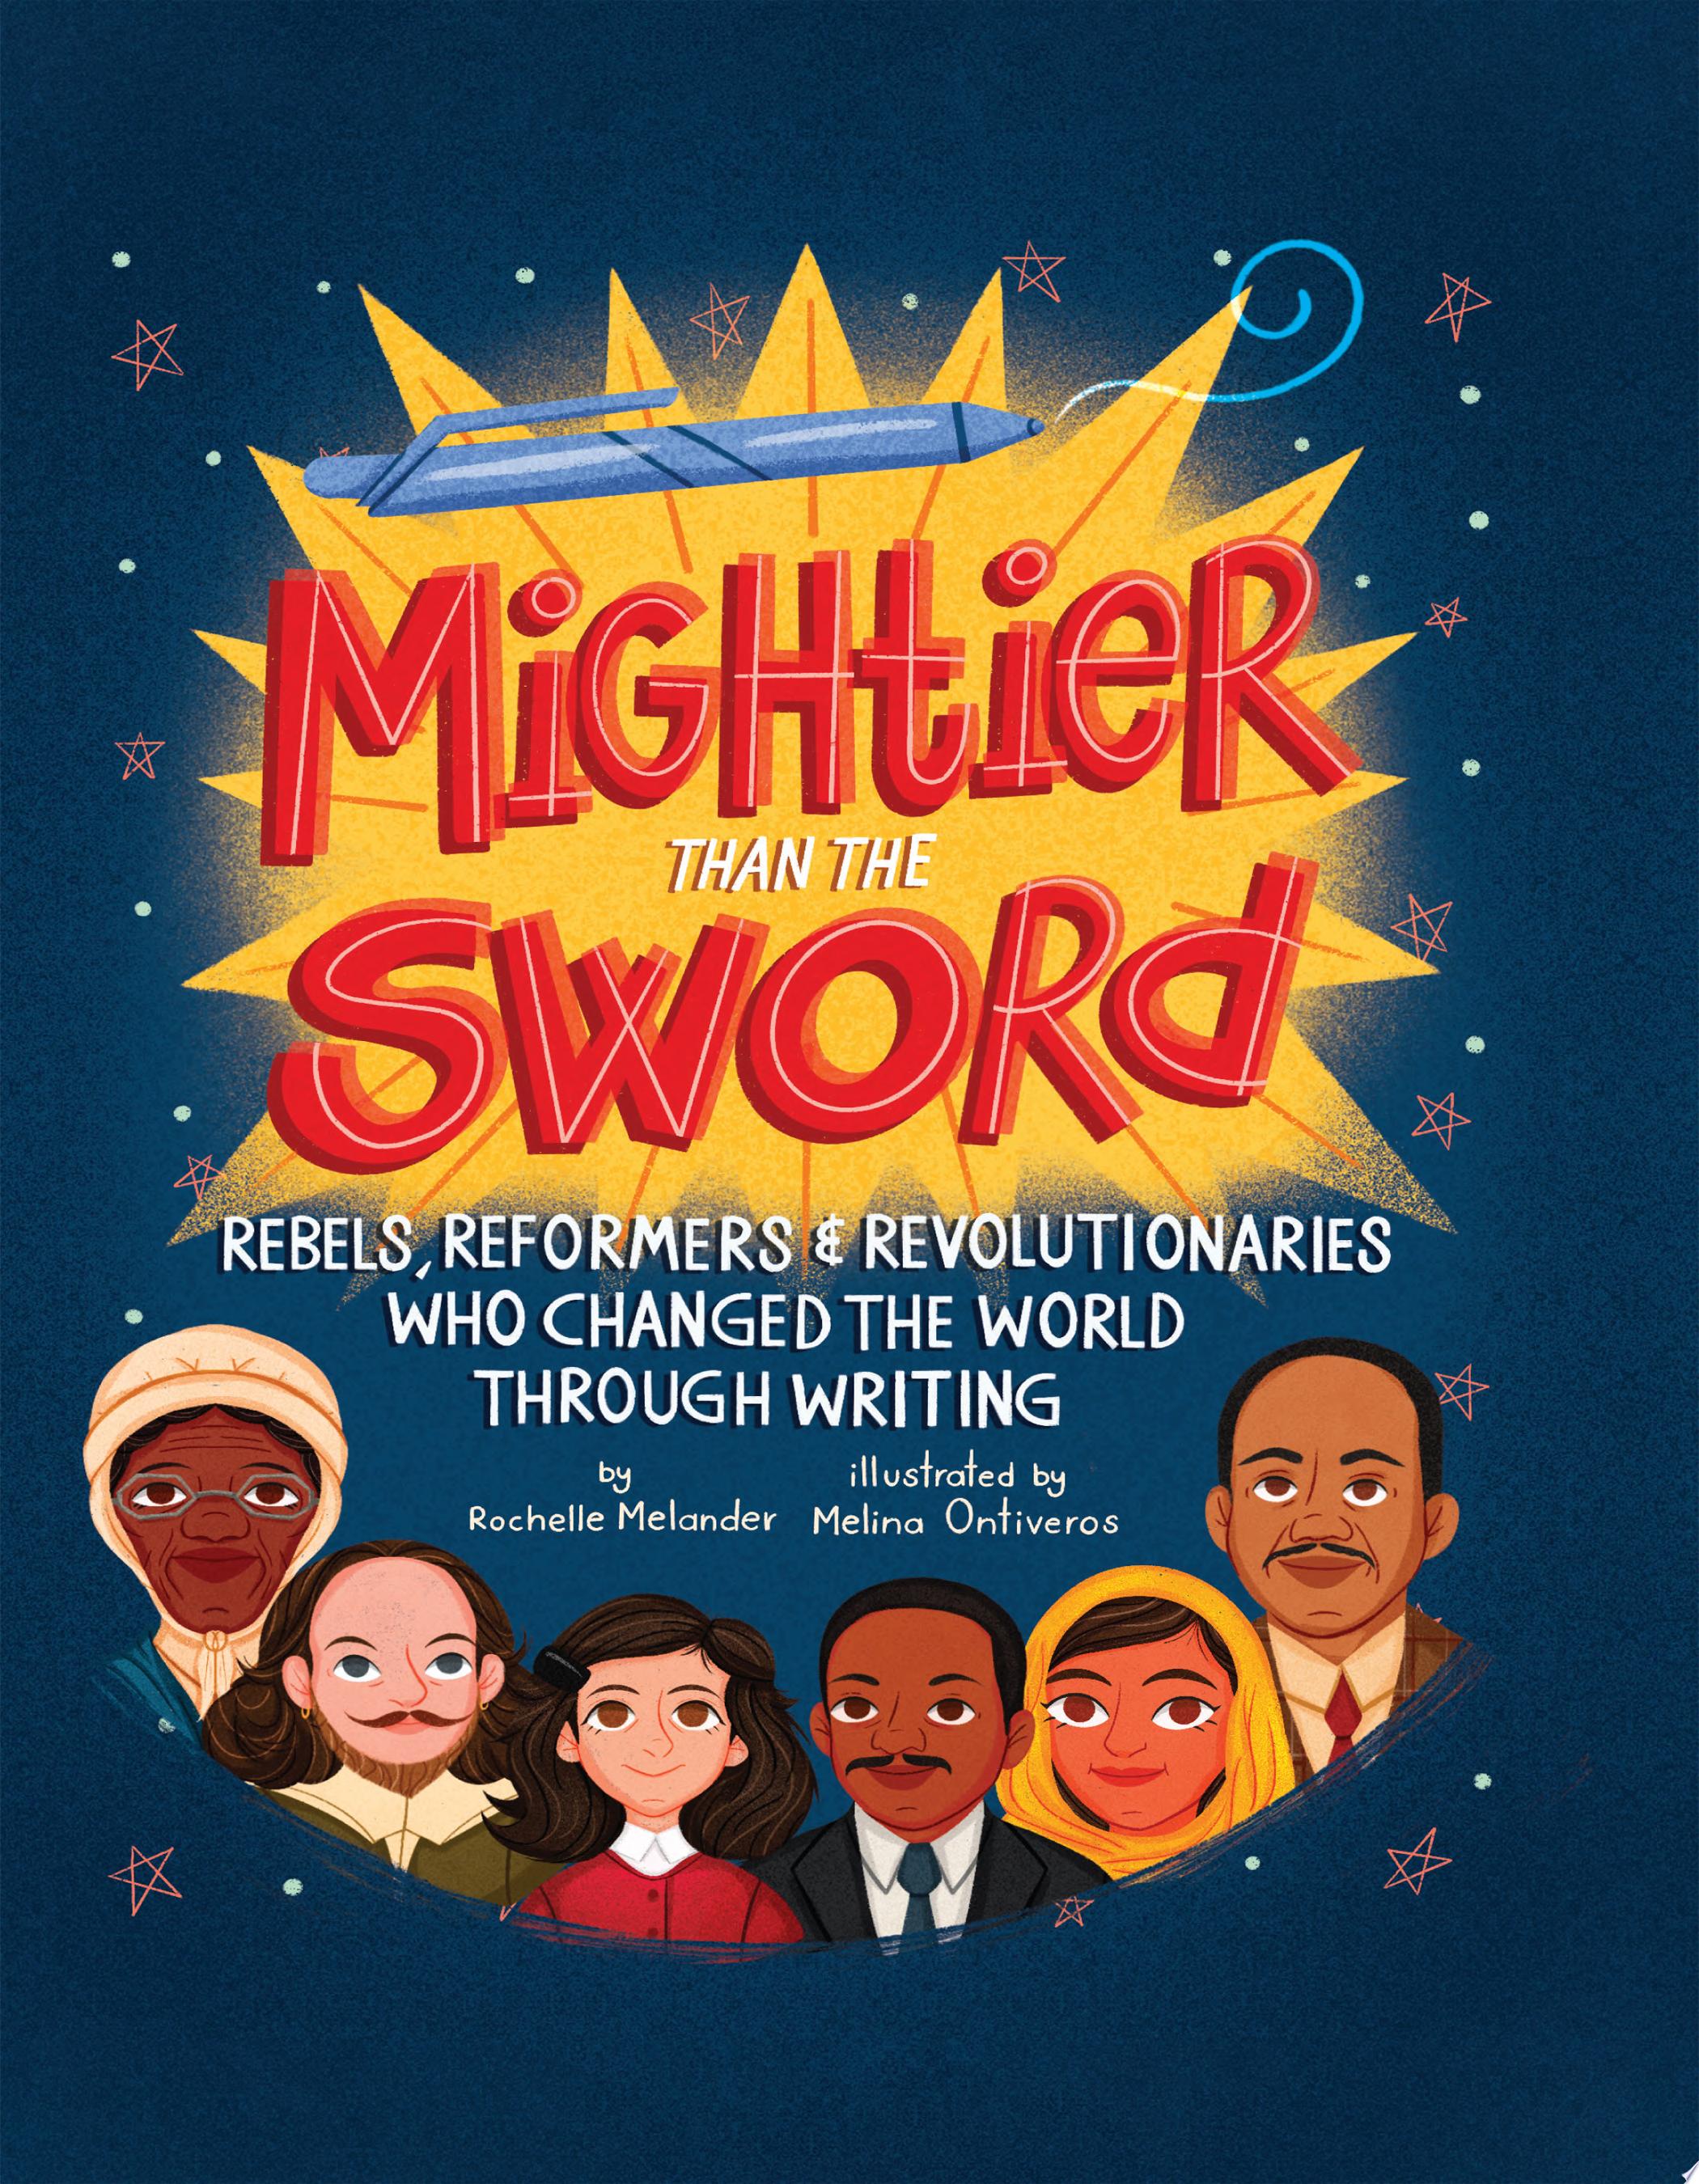 Image for "Mightier Than the Sword"